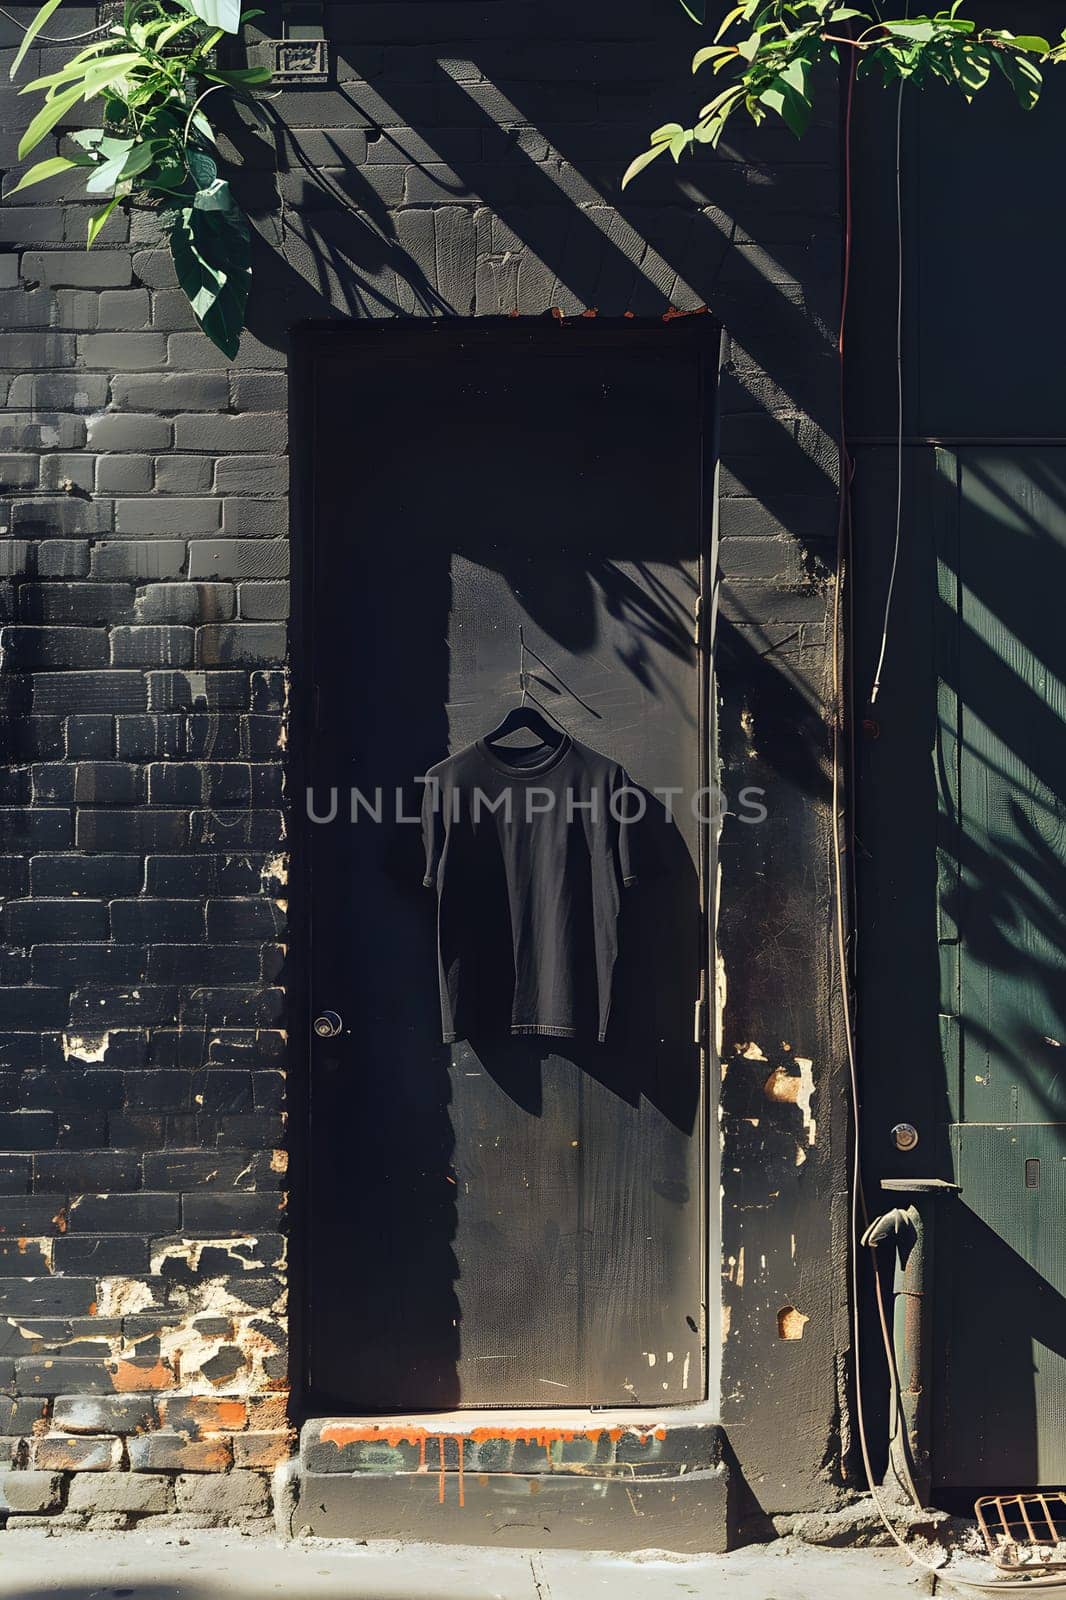 A black tshirt is hanging on a black door of a building, contrasting against the wood and brick facade. The green grass and tree add to the scene